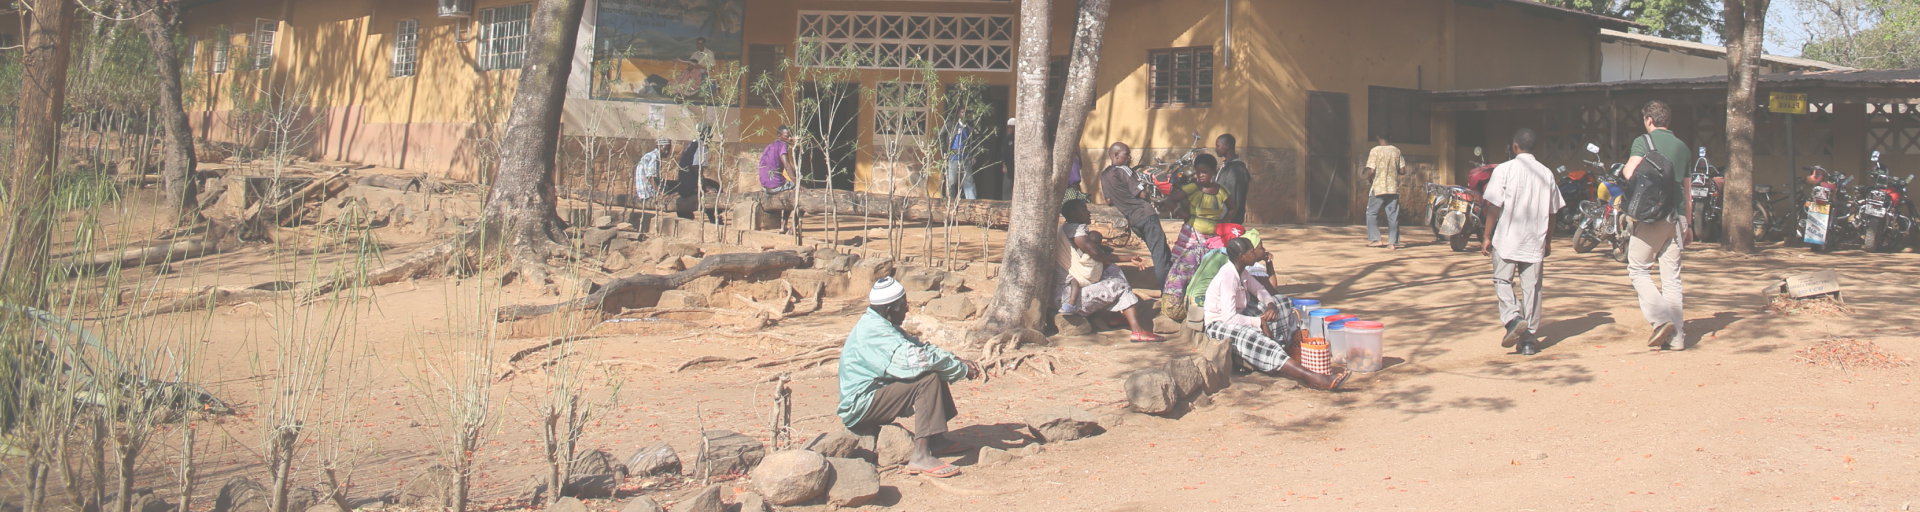 Rural scene in africa with people sat down